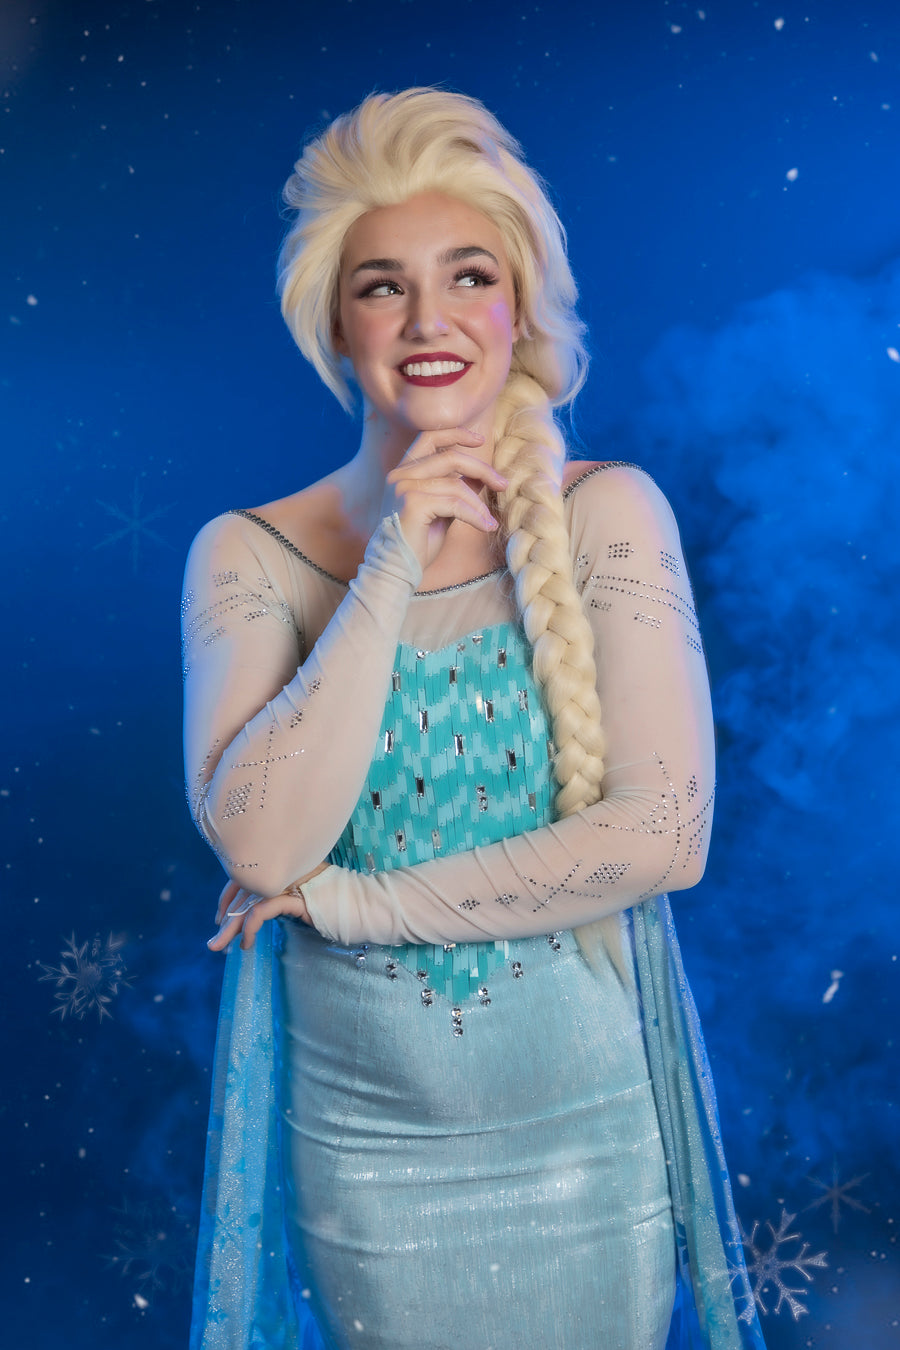 Elsa inspired by the Disney classic Frozen Costume Hire or Cosplay, plus Makeup and Photography. Proudly by and available at, Little Shop of Horrors Costumery 6/1 Watt Rd Mornington & Melbourne